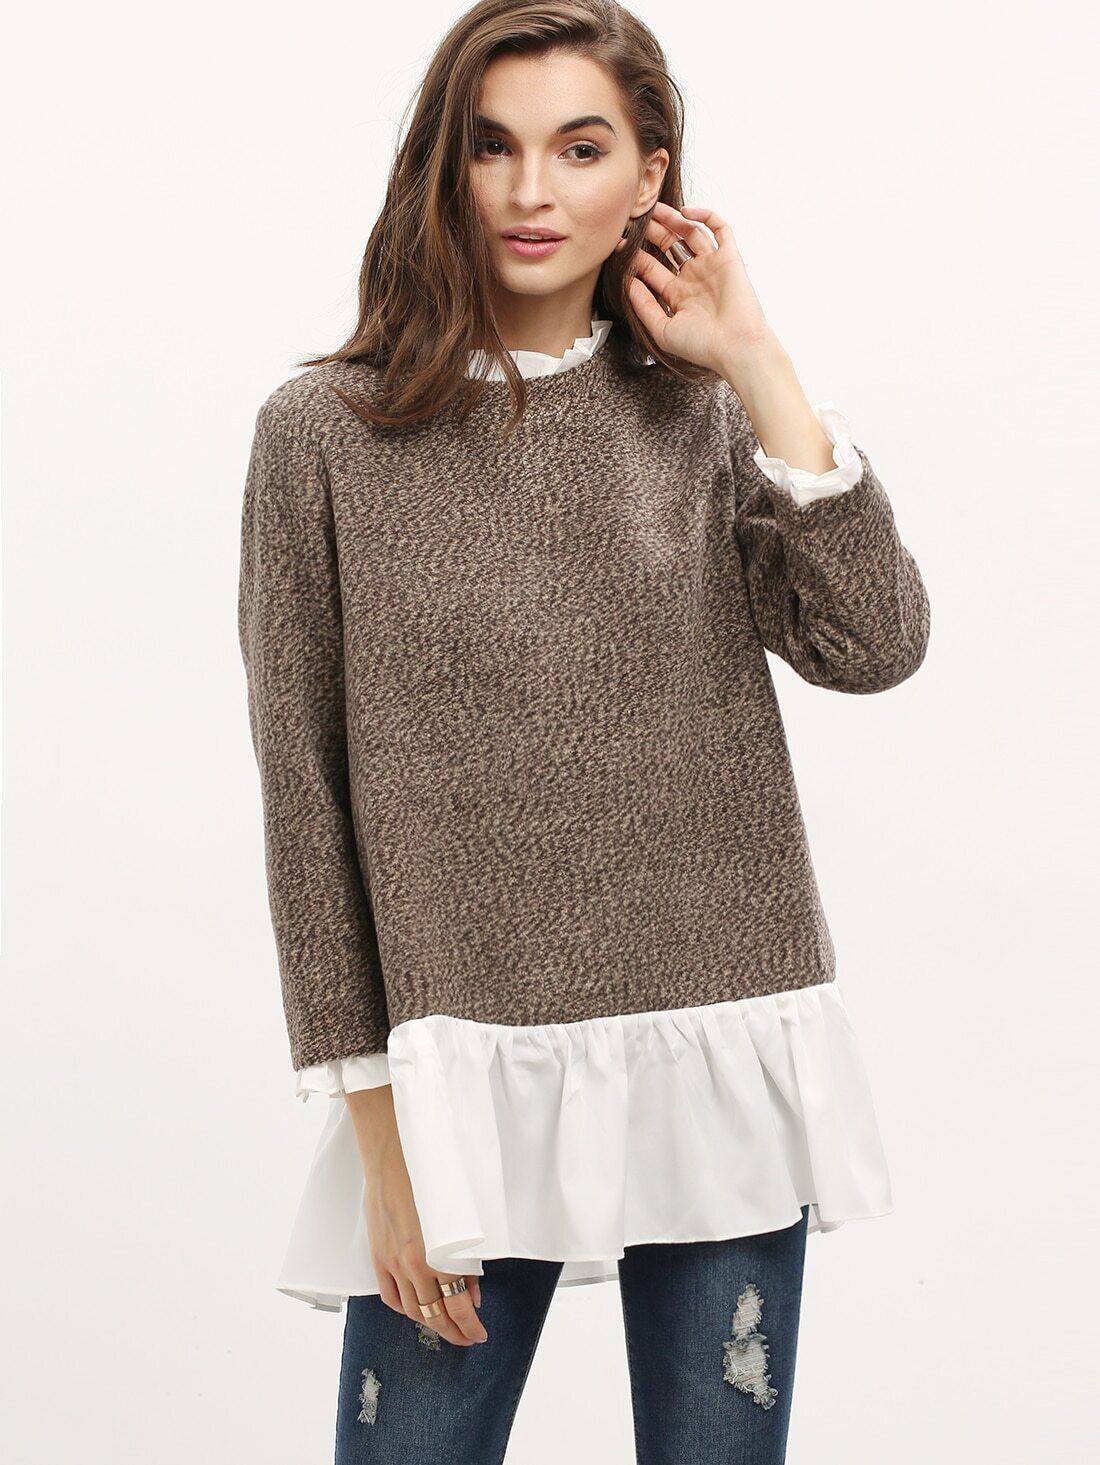 Brown White Long Sleeve Color Block Sweater | SHEIN